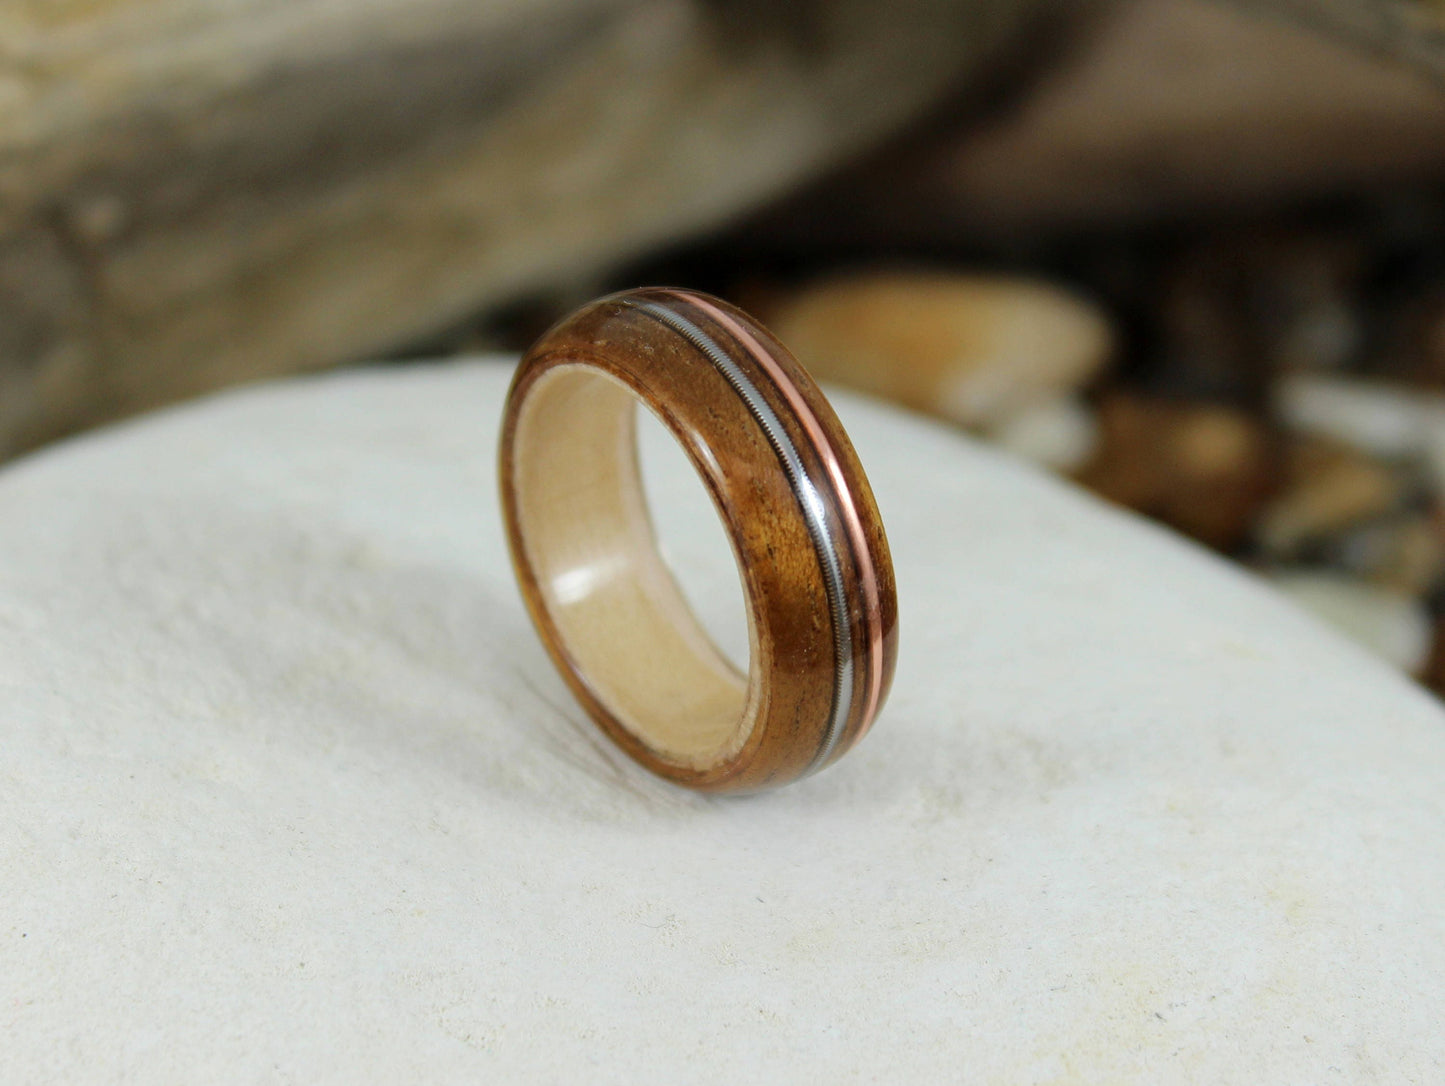 Koa & Maple with Copper and Silver Bent Wood Ring